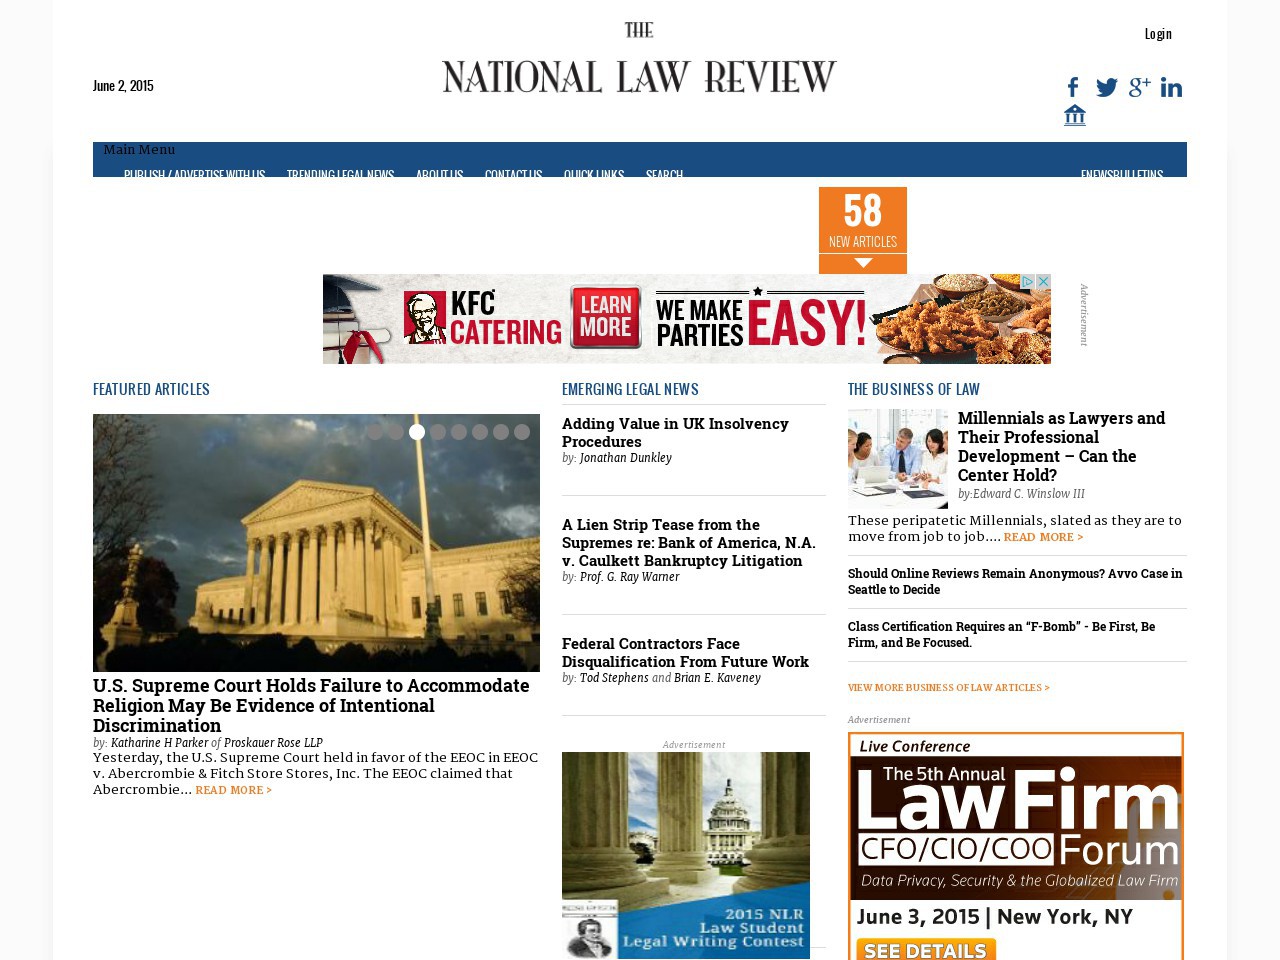 http://www.natlawreview.com/article/telling-harasser-to-stop-protected-activity-under-title-vii